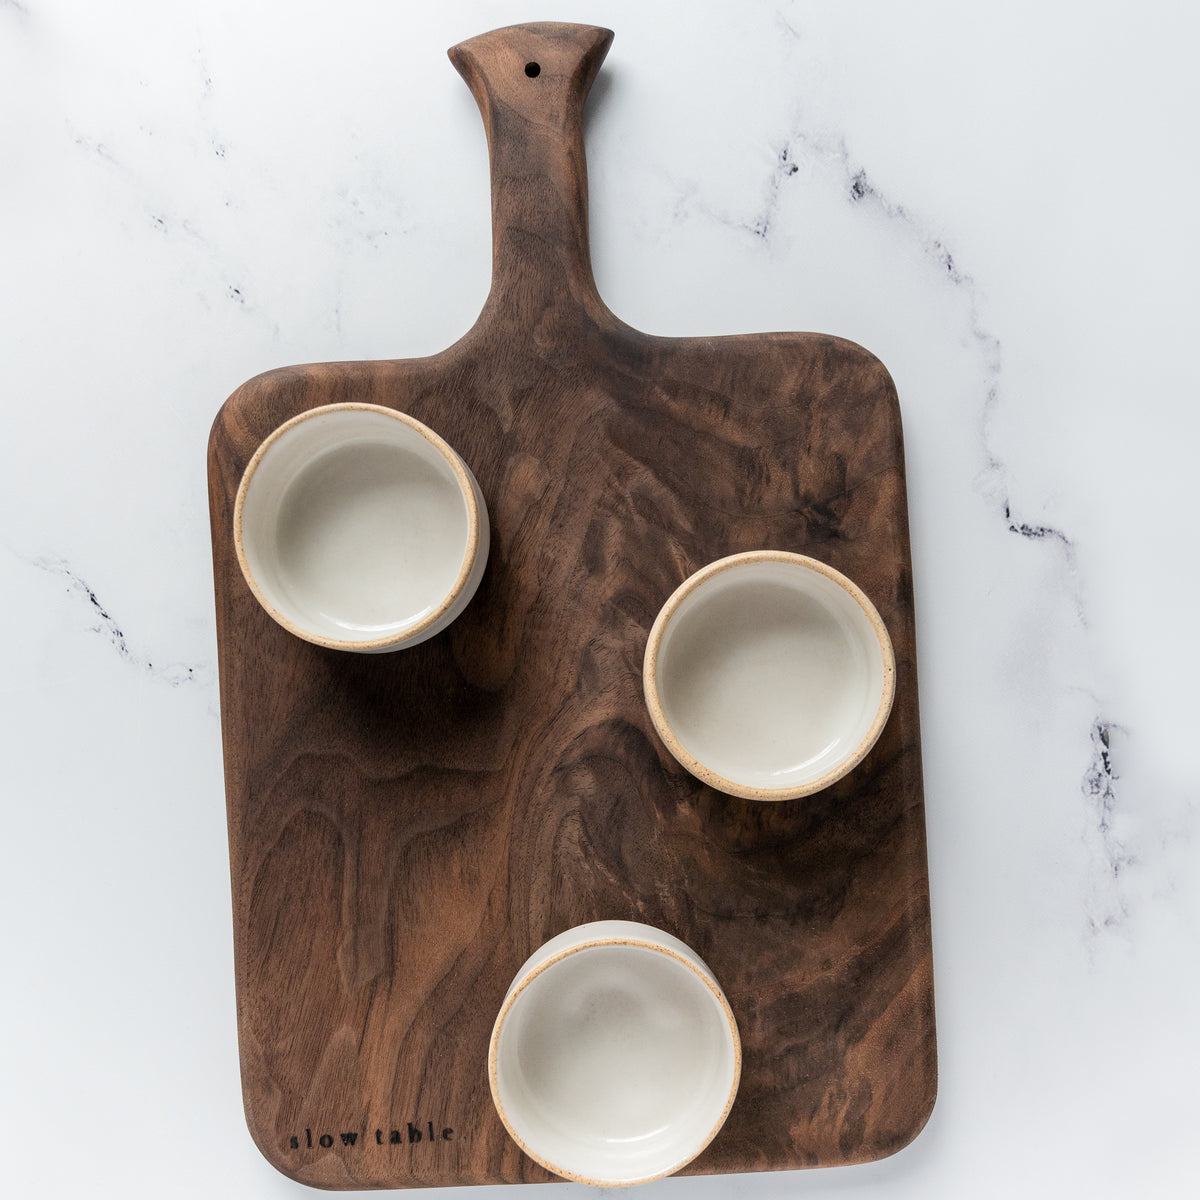 A paddle style walnut serving board styled with three handmade stoneware ramekins, placed on a bright white marble countertop.